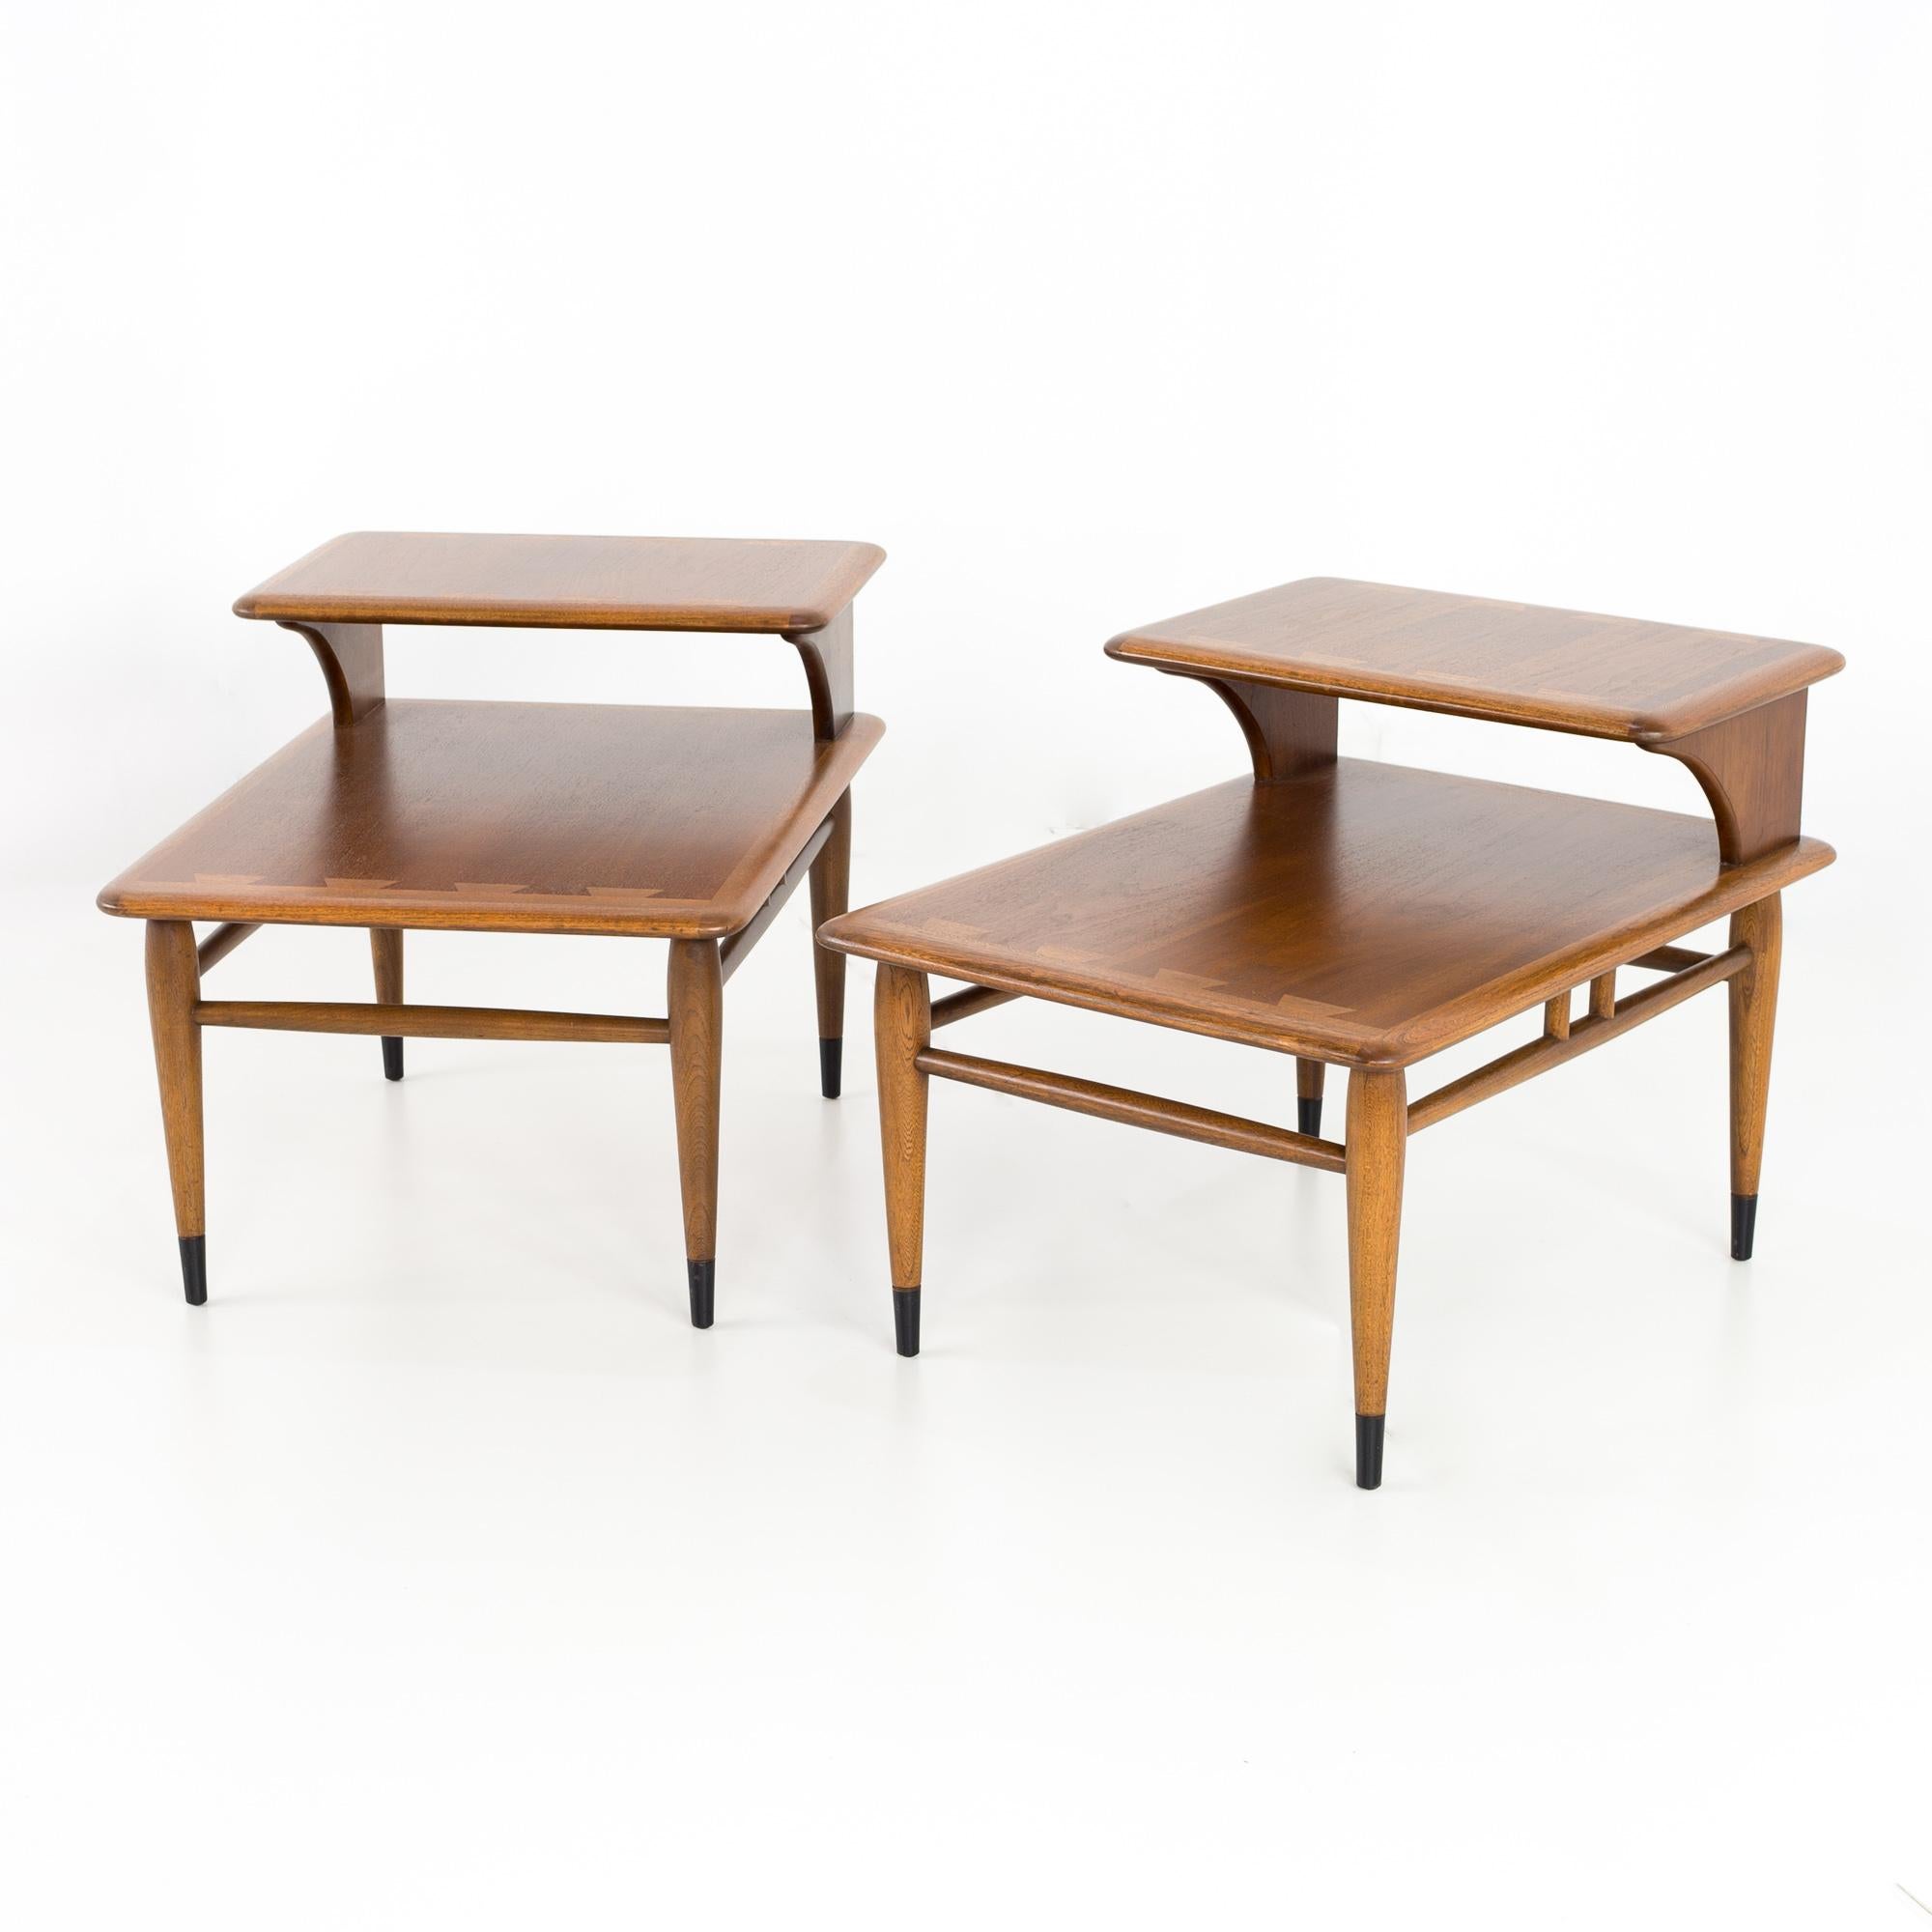 American Lane Acclaim Mid Century Walnut Dovetail Step Side End Tables, Pair